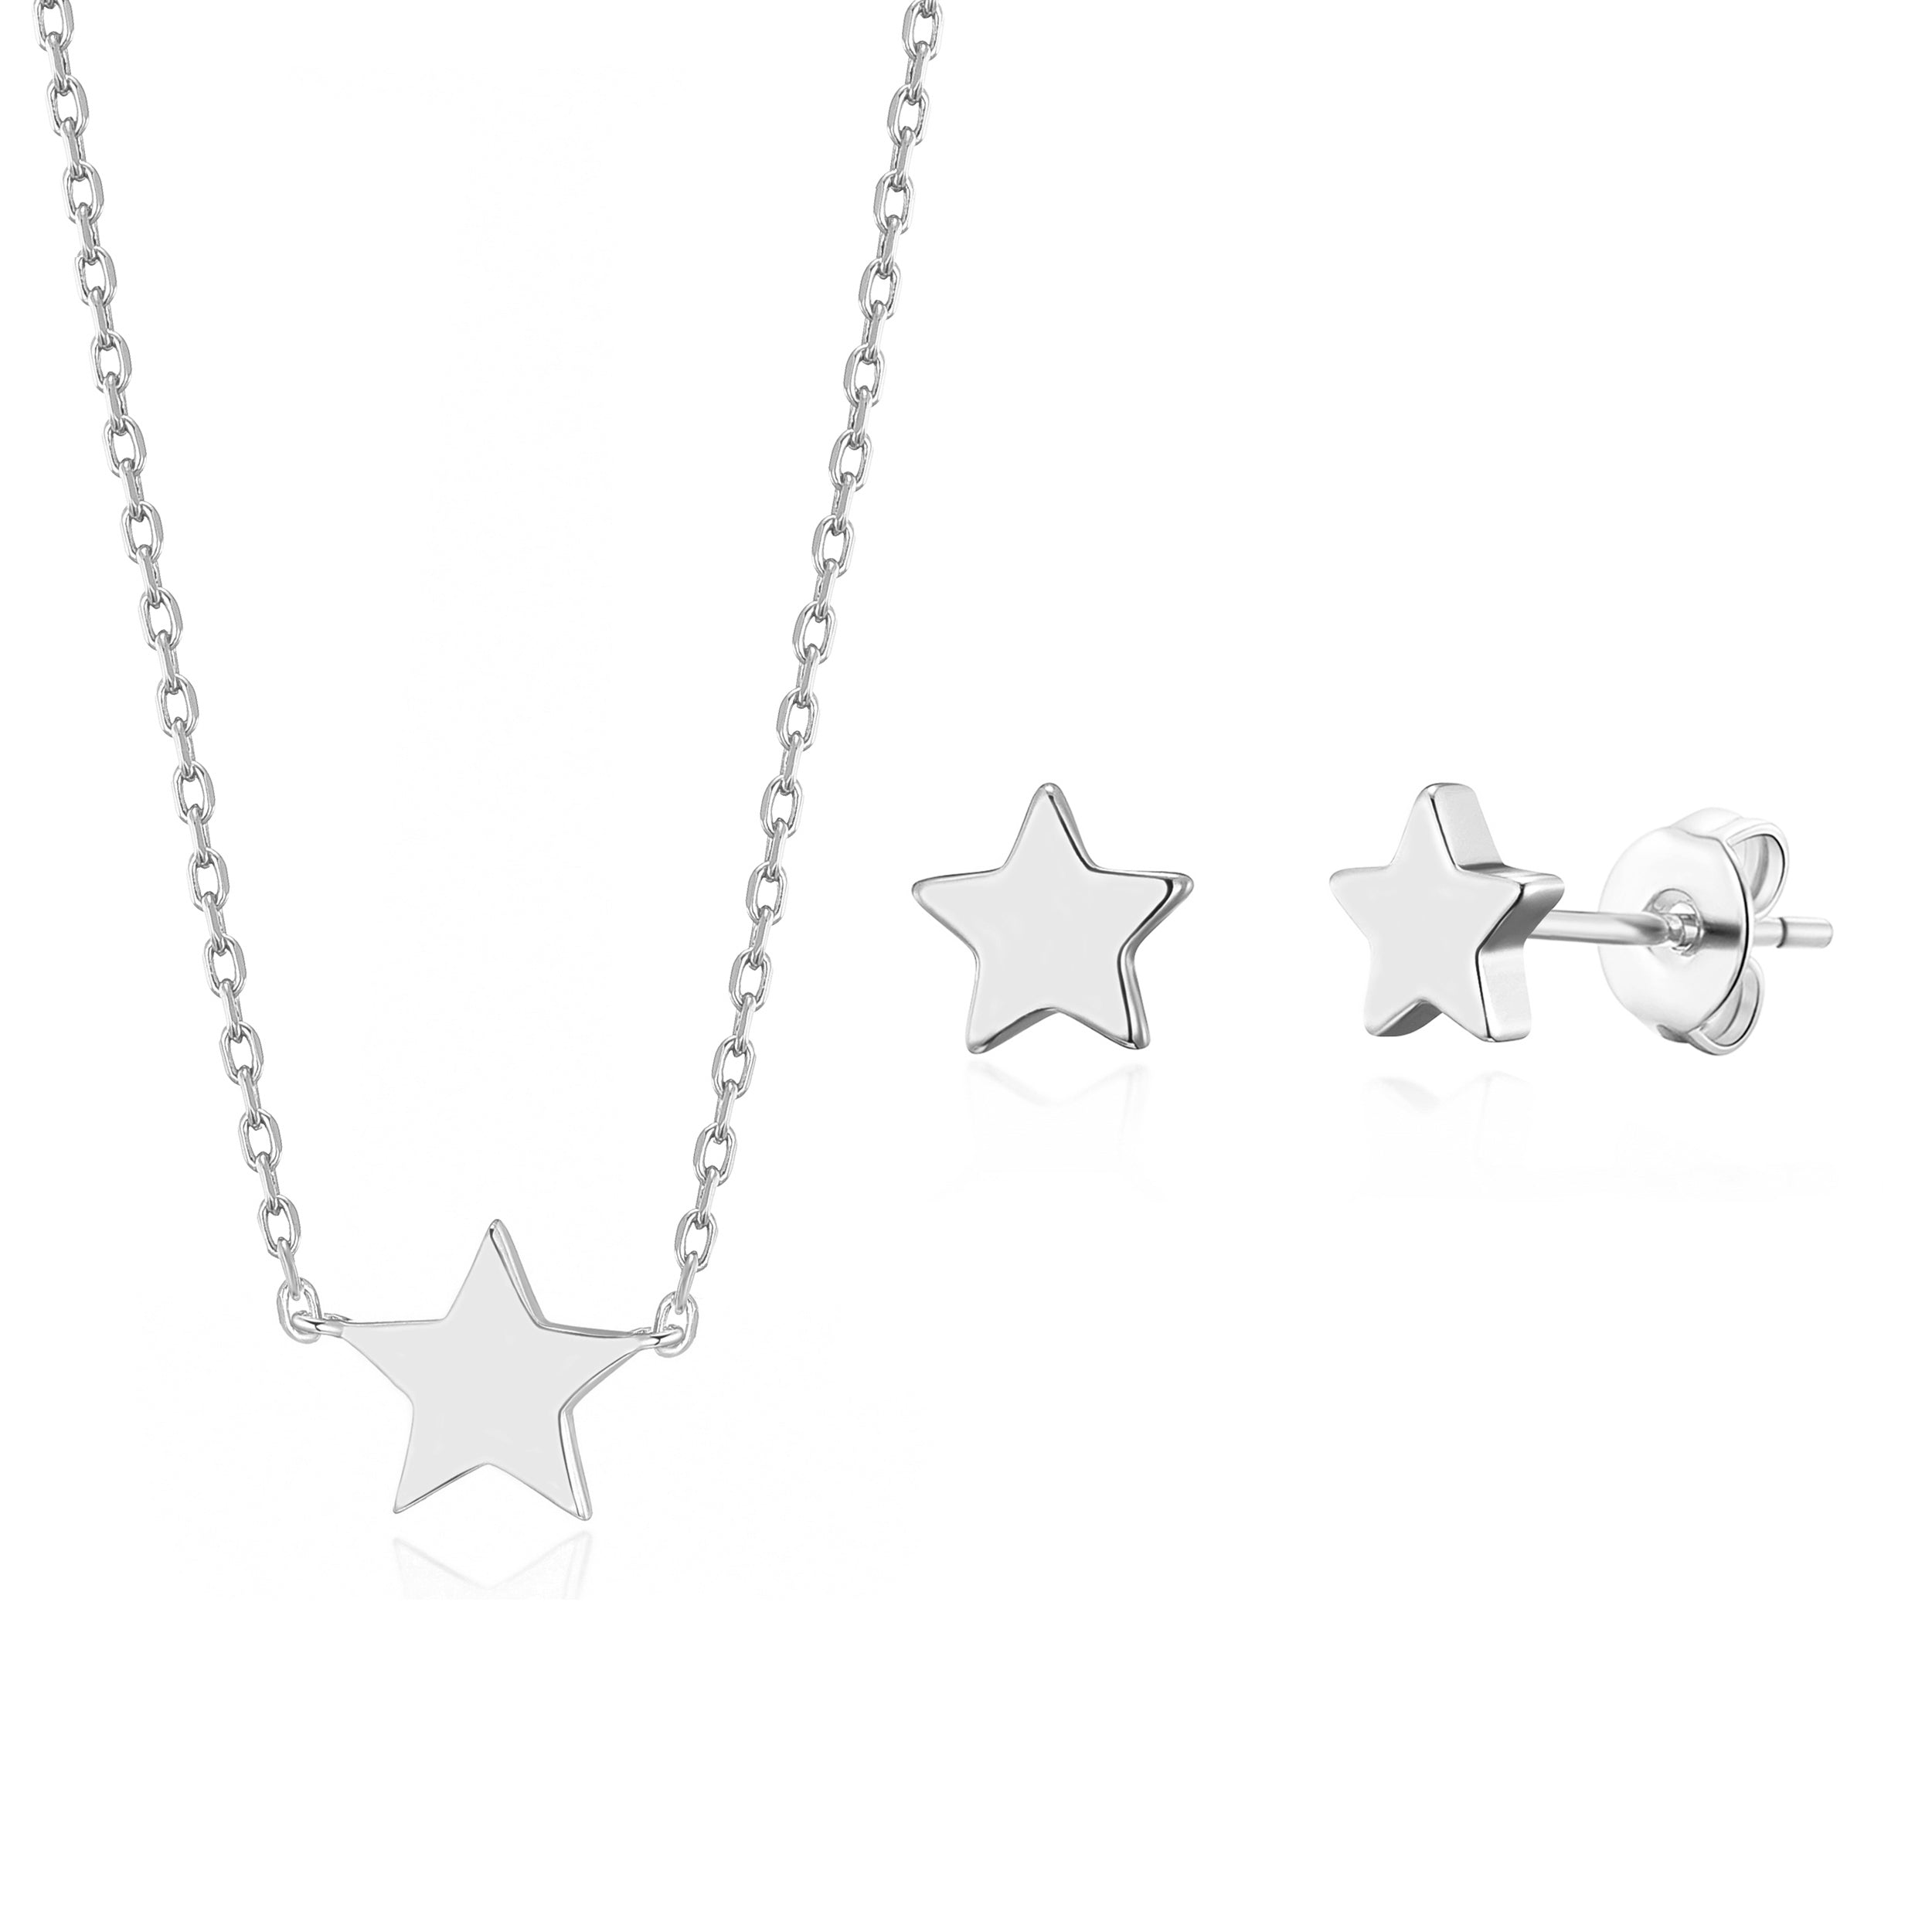 Silver Plated Star Set